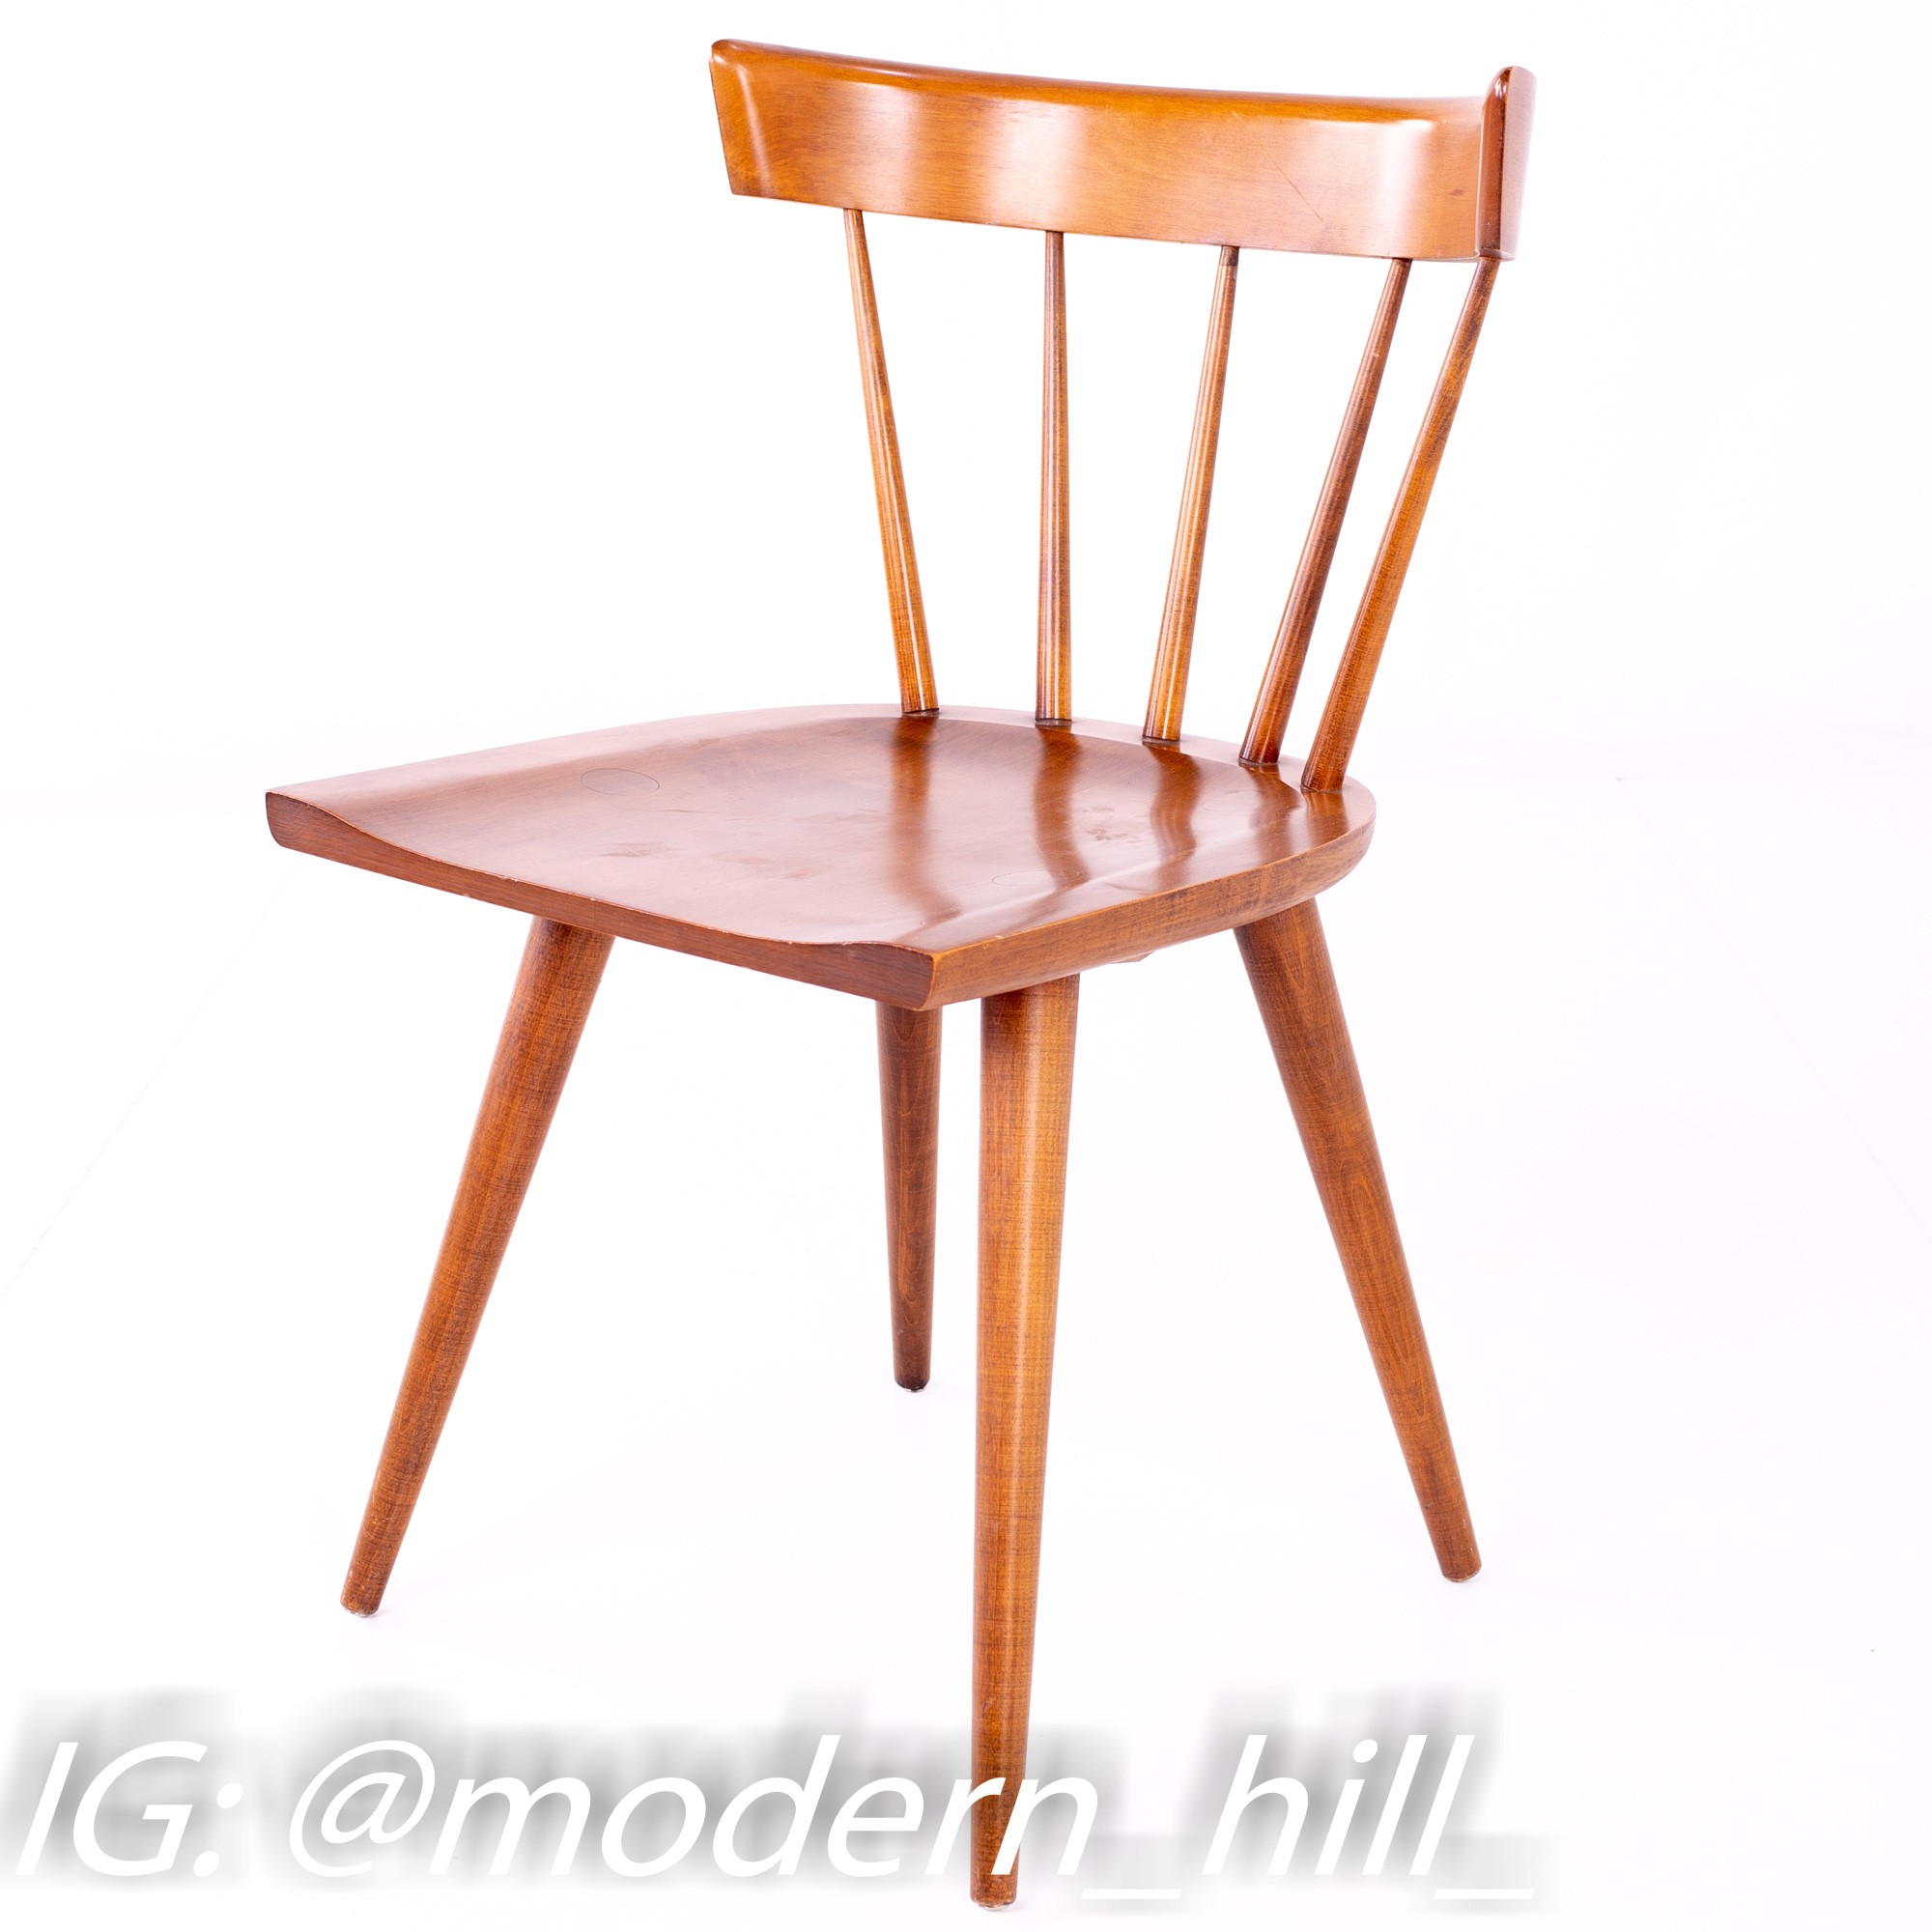 Paul Mccobb for Planner Group Mid Century Maple Dining Chairs - Set of 4